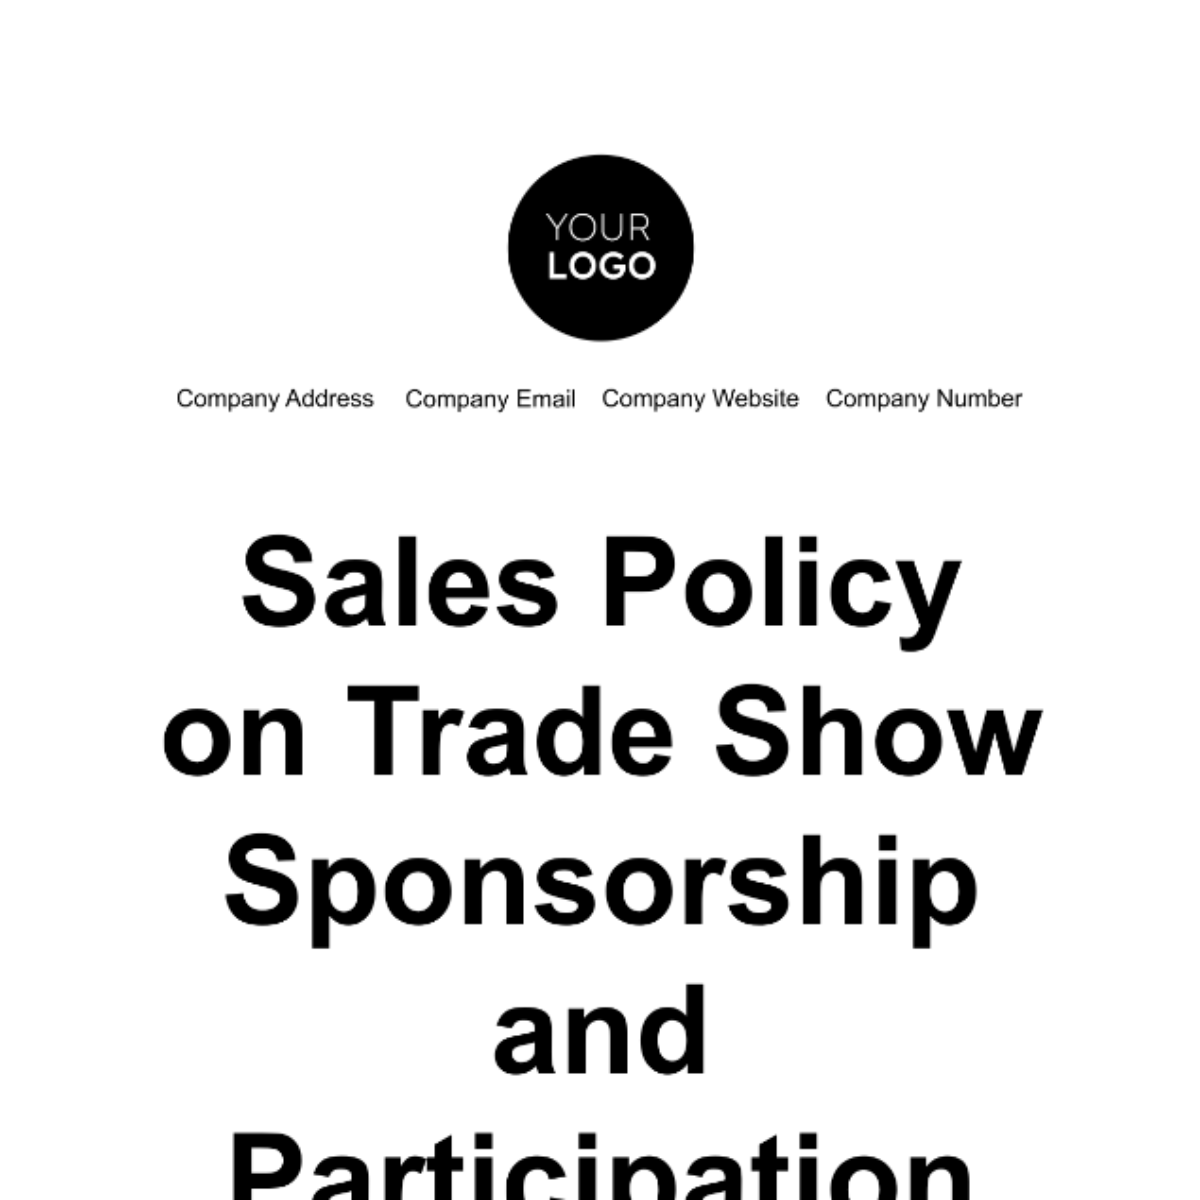 Free Sales Policy on Trade Show Sponsorship and Participation Template